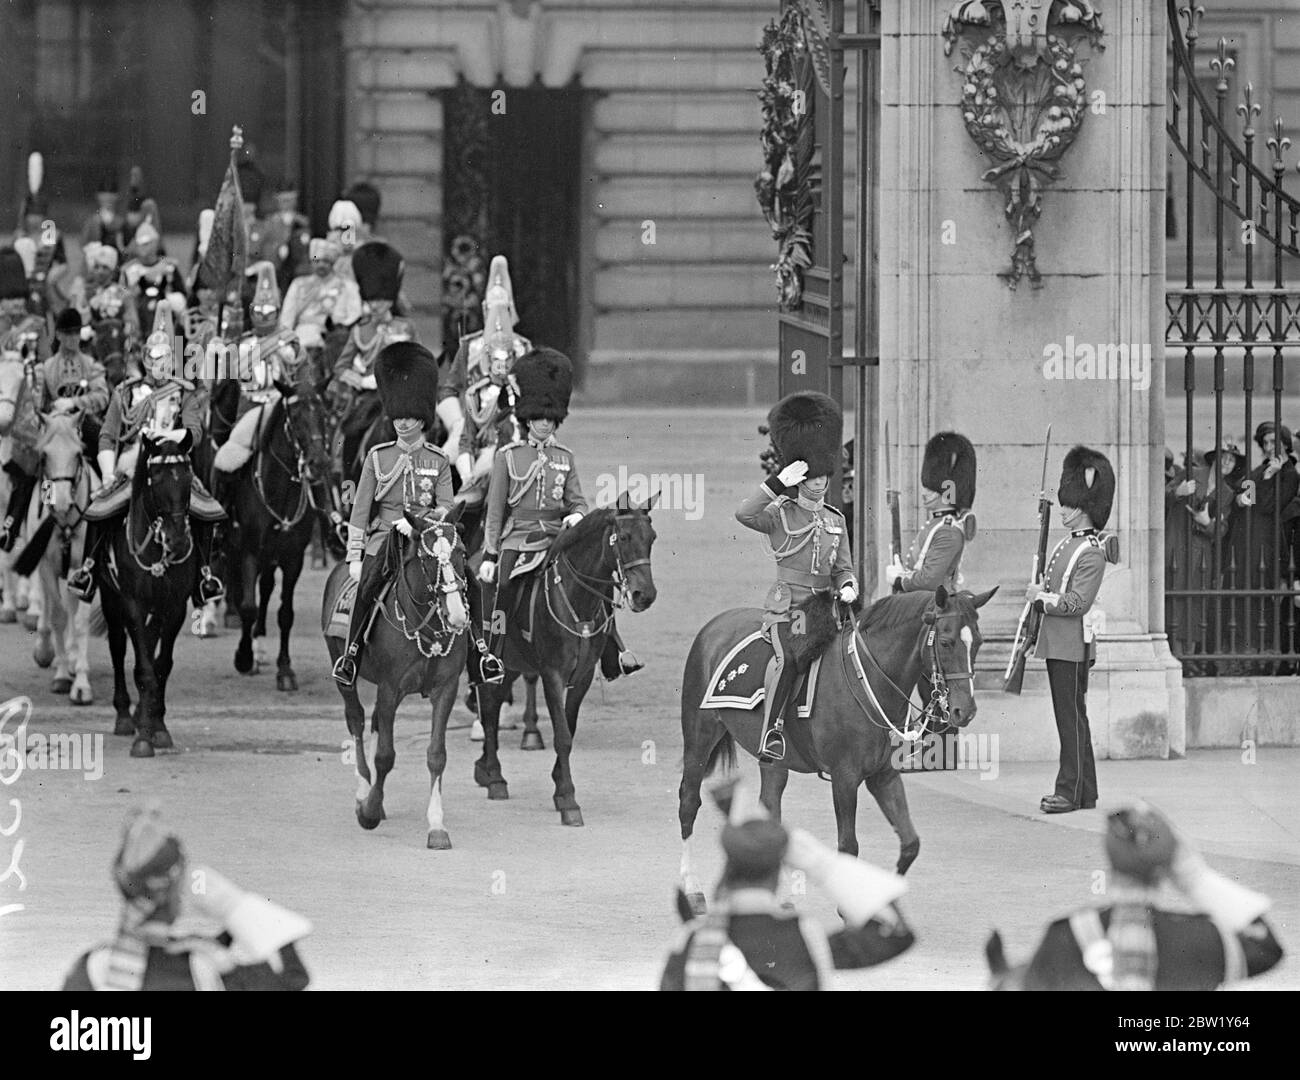 King rides in procession to Horse Guards for Trooping the Colour. The first time since his Ascension. The King Road in procession from Buckingham Palace to attend the ceremony of Trooping the Colour on the Horse Guards Parade. The King was accompanied by the Duke of Gloucester and Kent and Prince Arthur of Connaught. Photo shows, the King, followed by the Royal troops and Prince Arthur of Connaught is the procession left at Buckingham Palace. 9 June 1937 Stock Photo